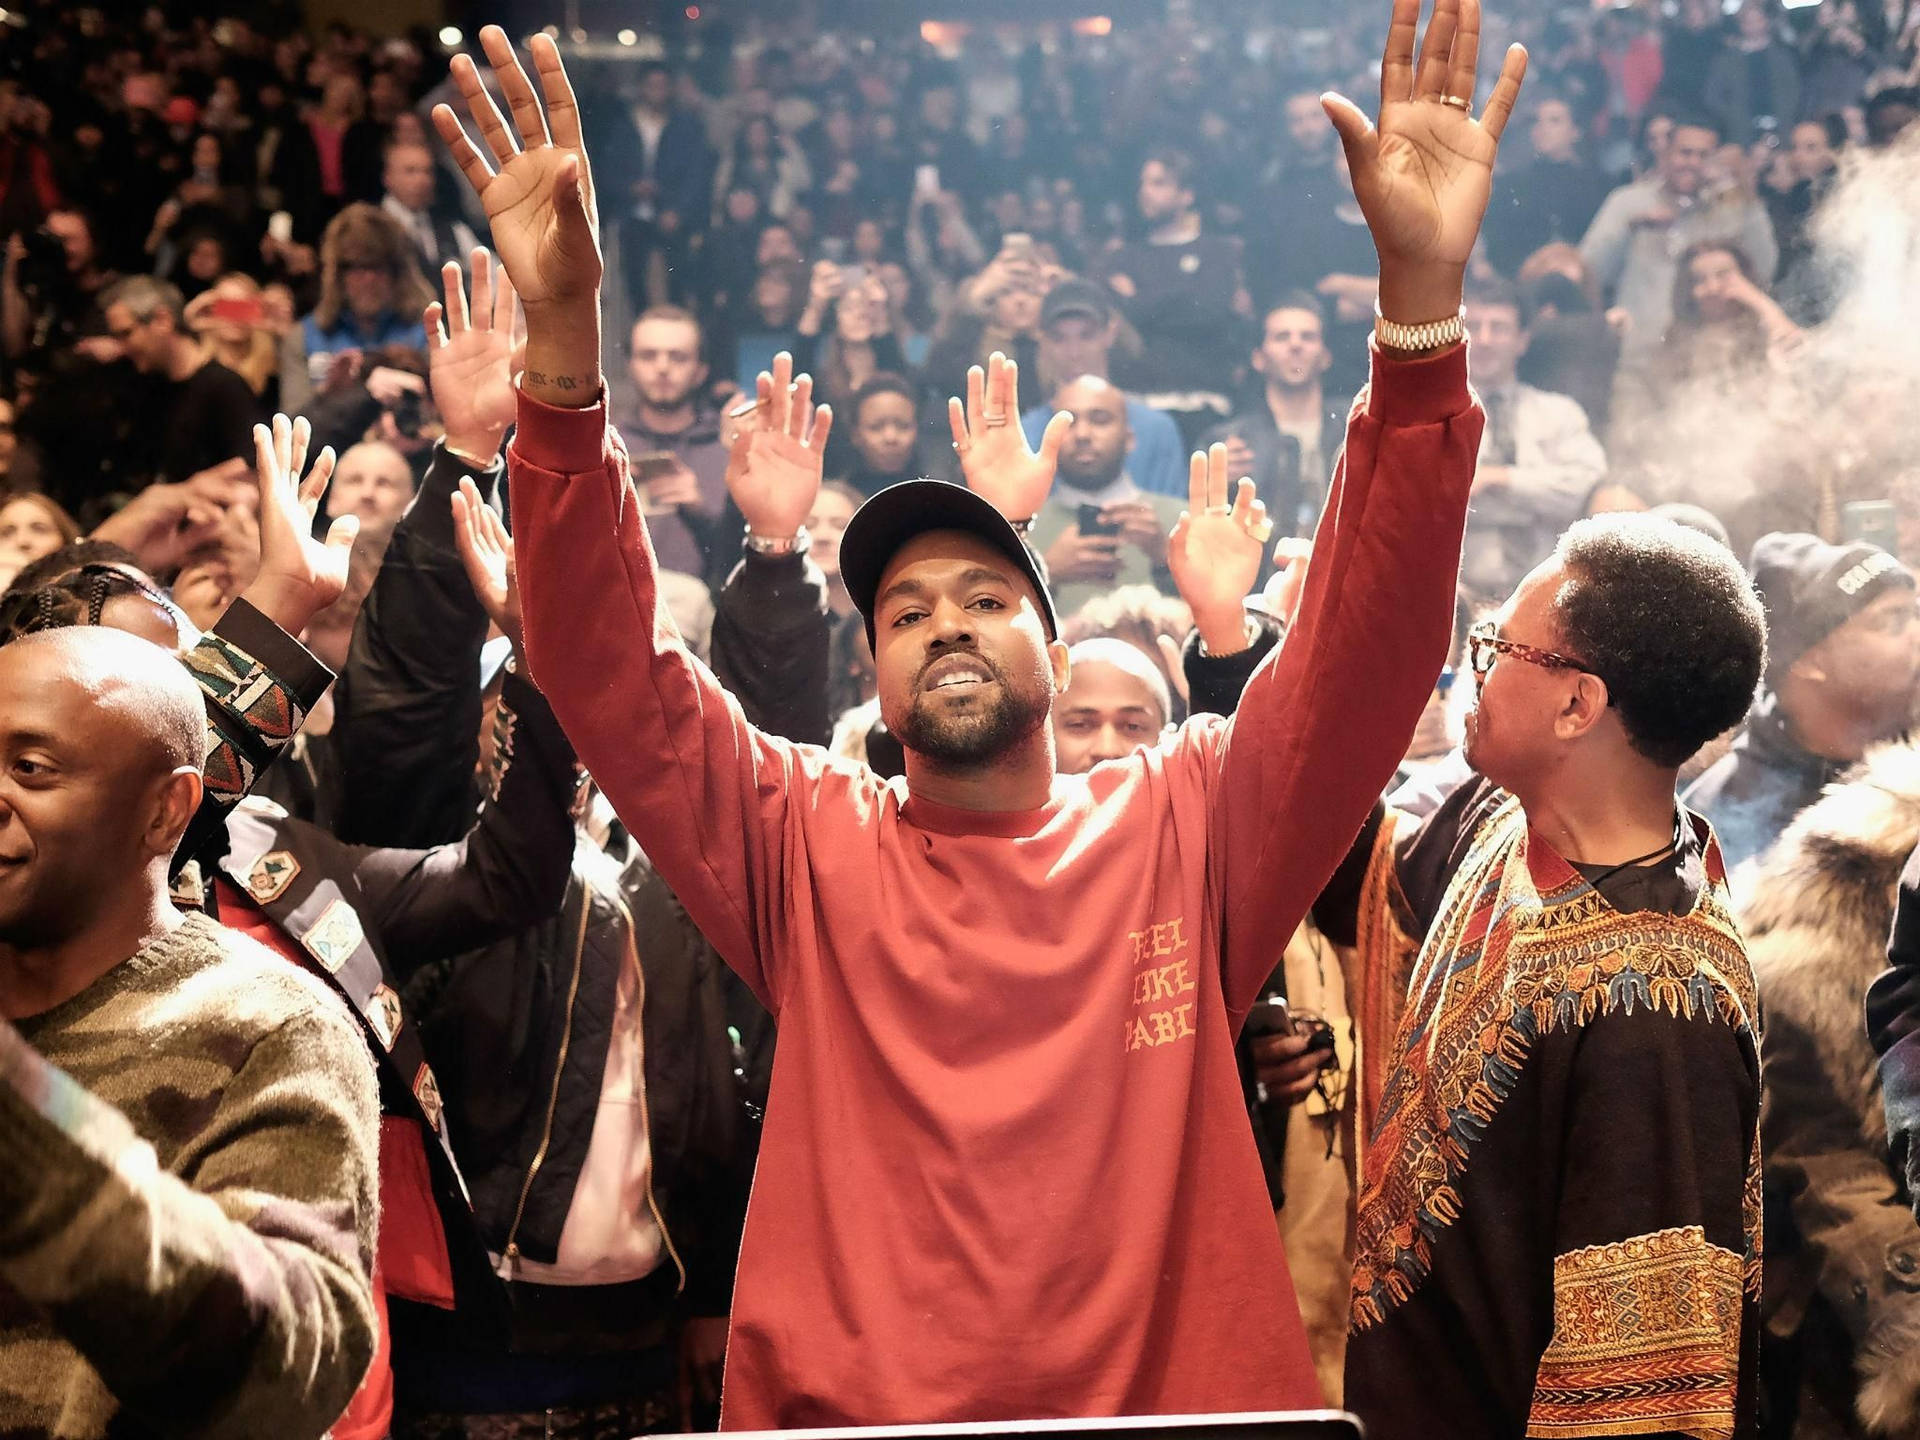 Kanye West 2048X1536 Wallpaper and Background Image